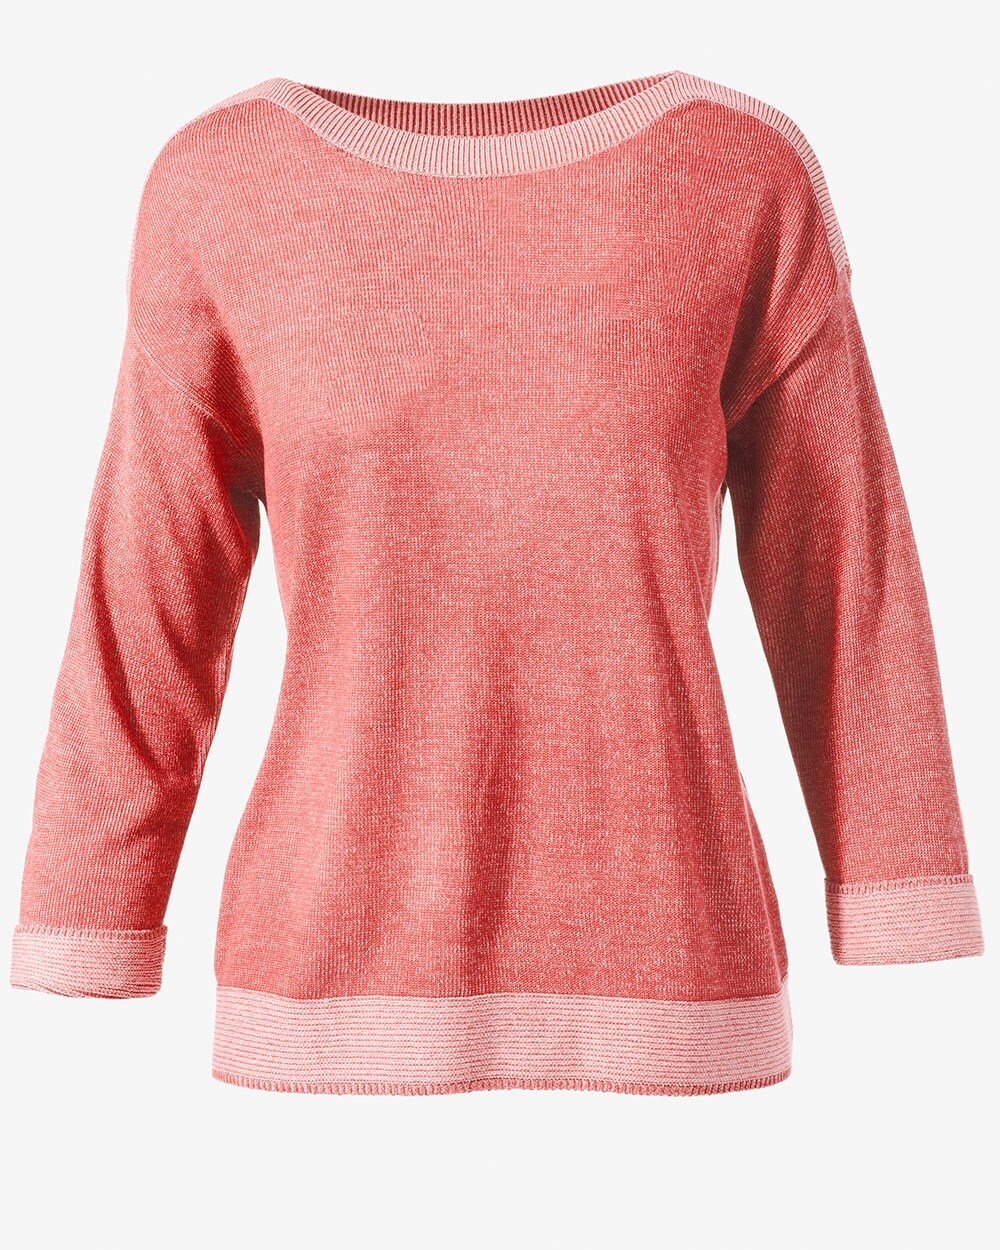 Two-Tone Boat-Neck Pullover